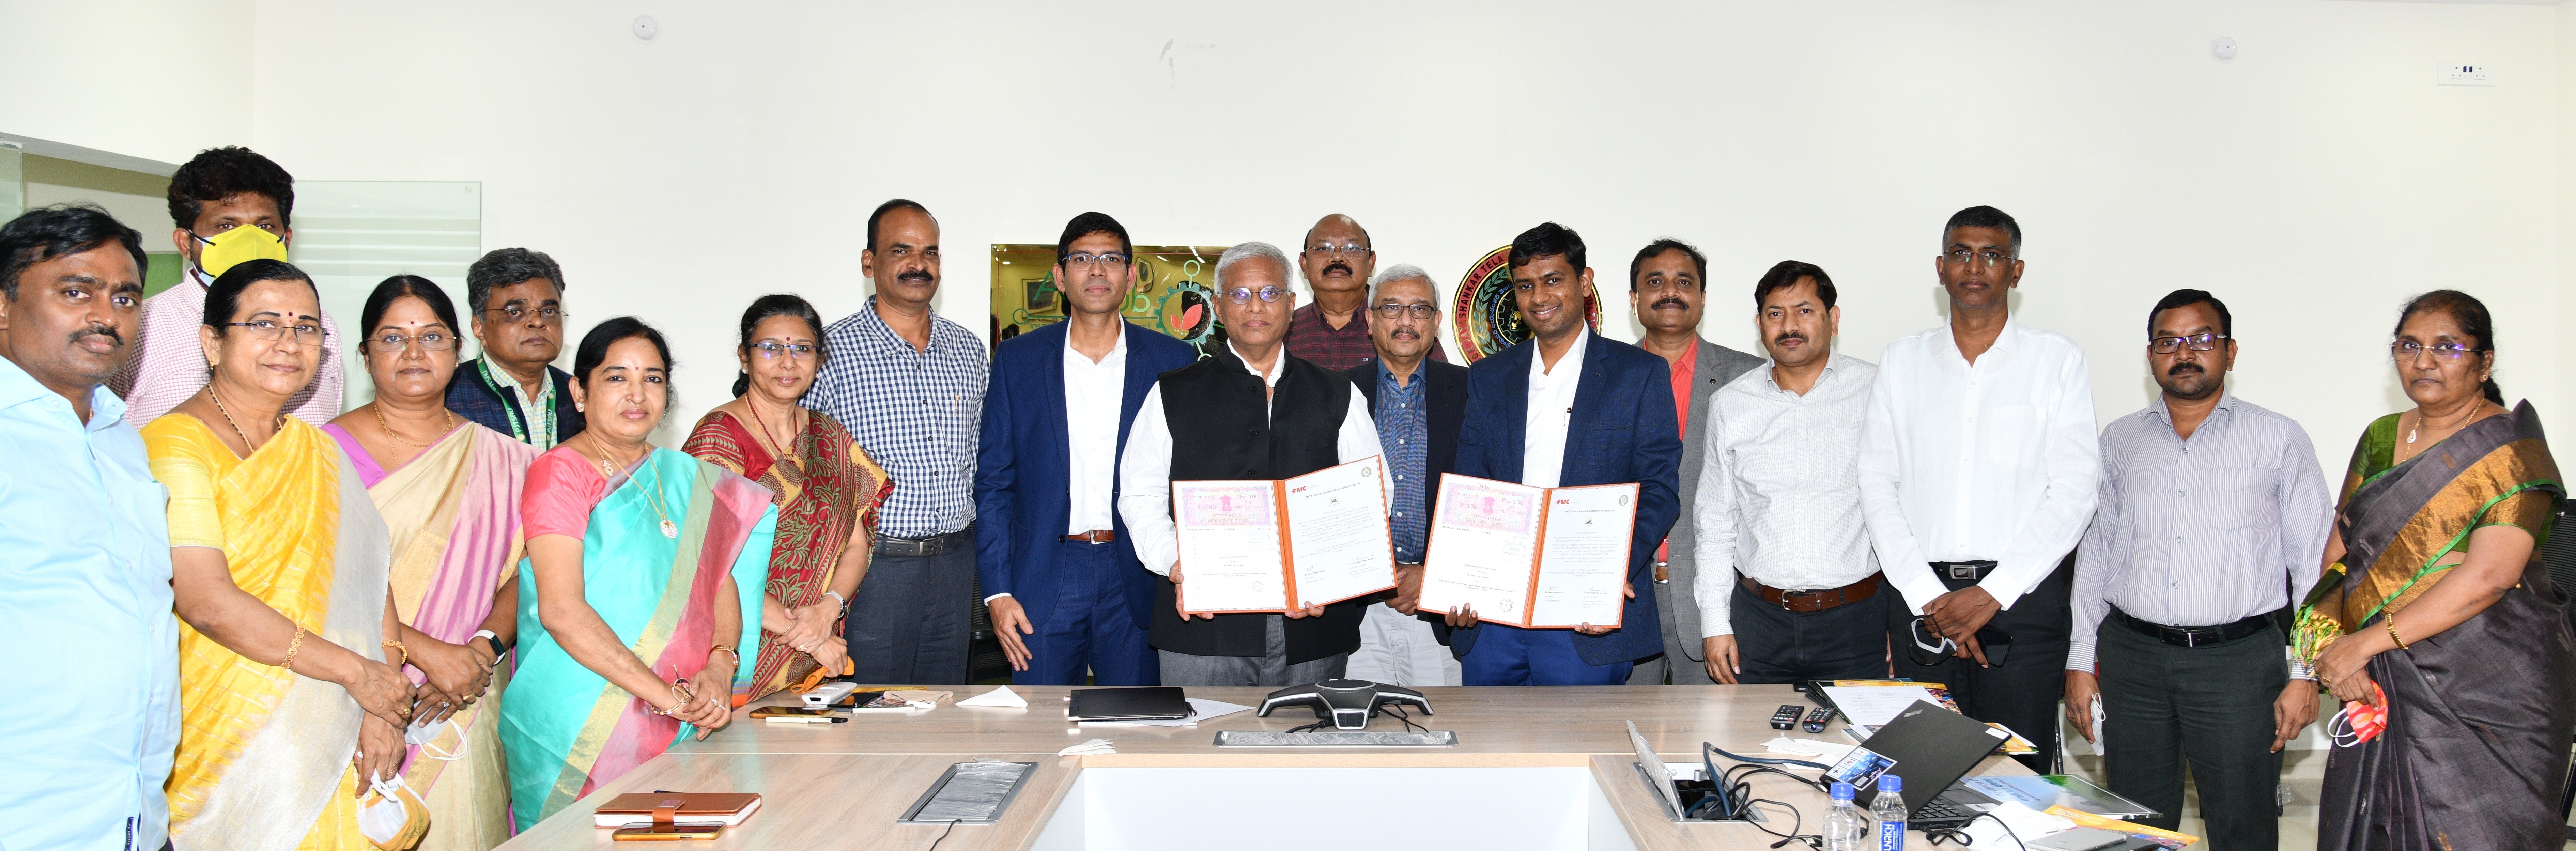 FMC India collaborates with PJTS Agricultural University to foster future leaders in agriculture under the Science Leaders Scholarship program